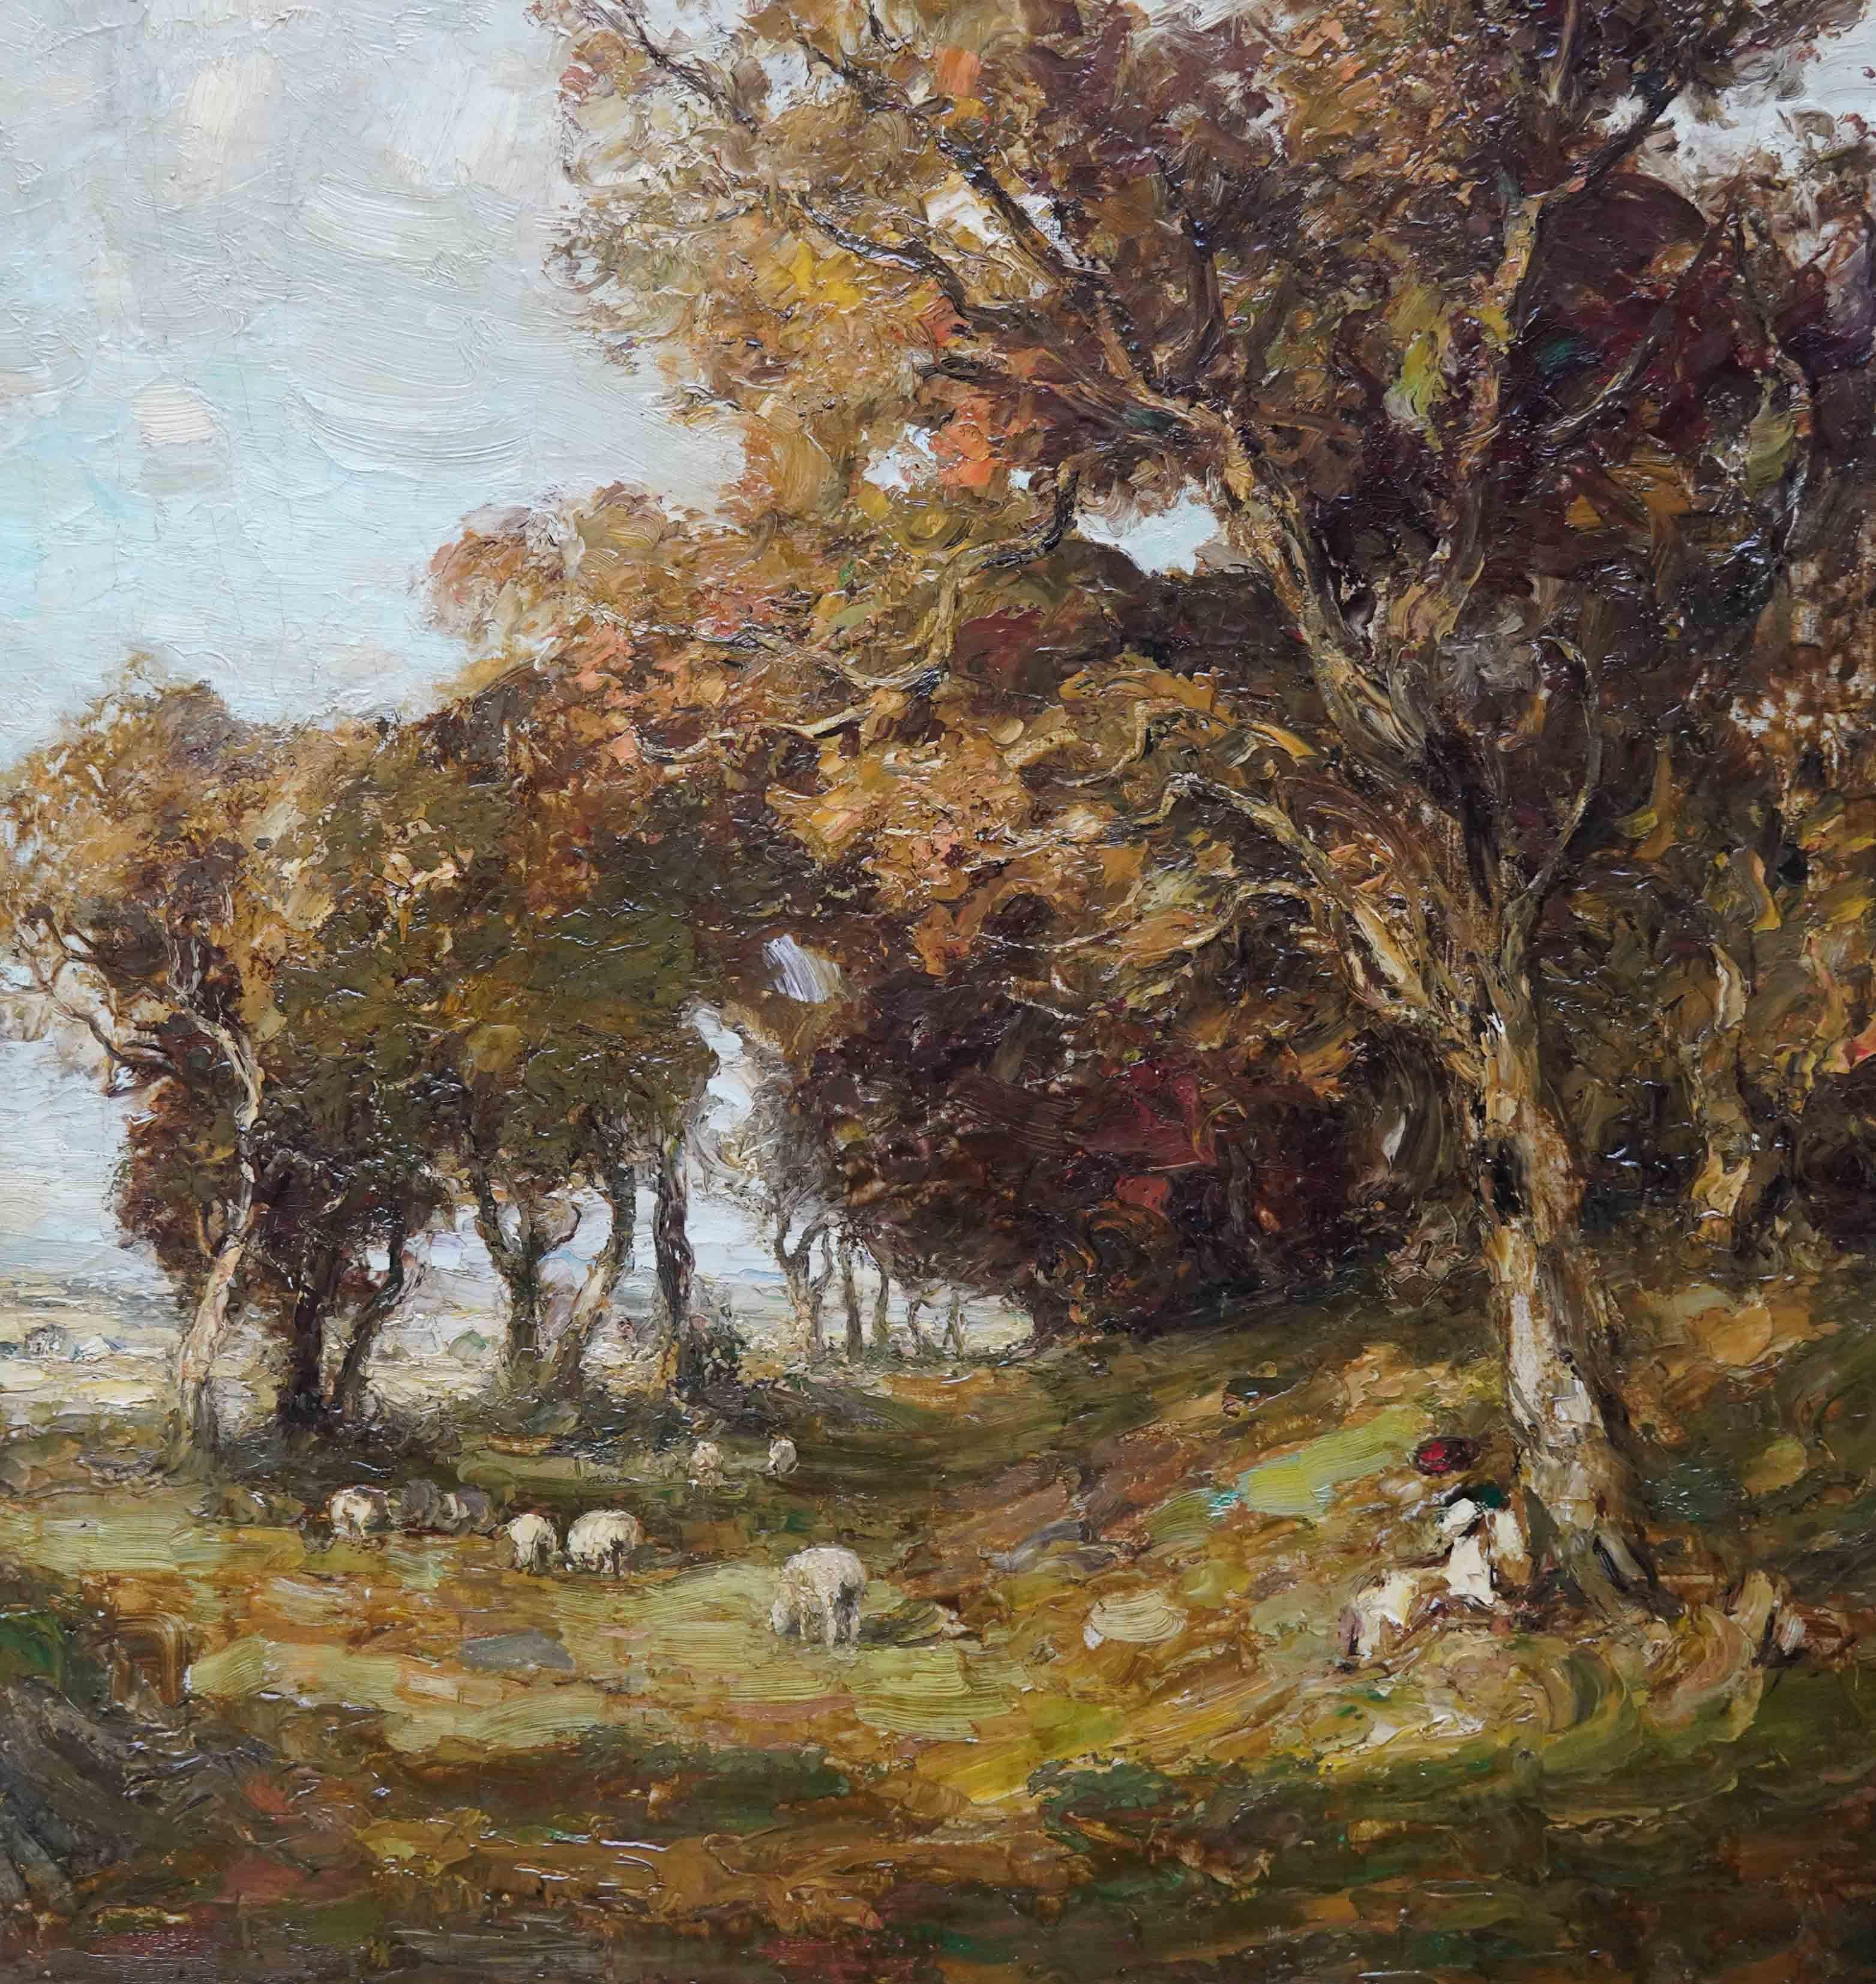 Landscape with Sheep - Scottish 19th century Kirkcudbright art oil painting  - Impressionist Painting by William Mouncey